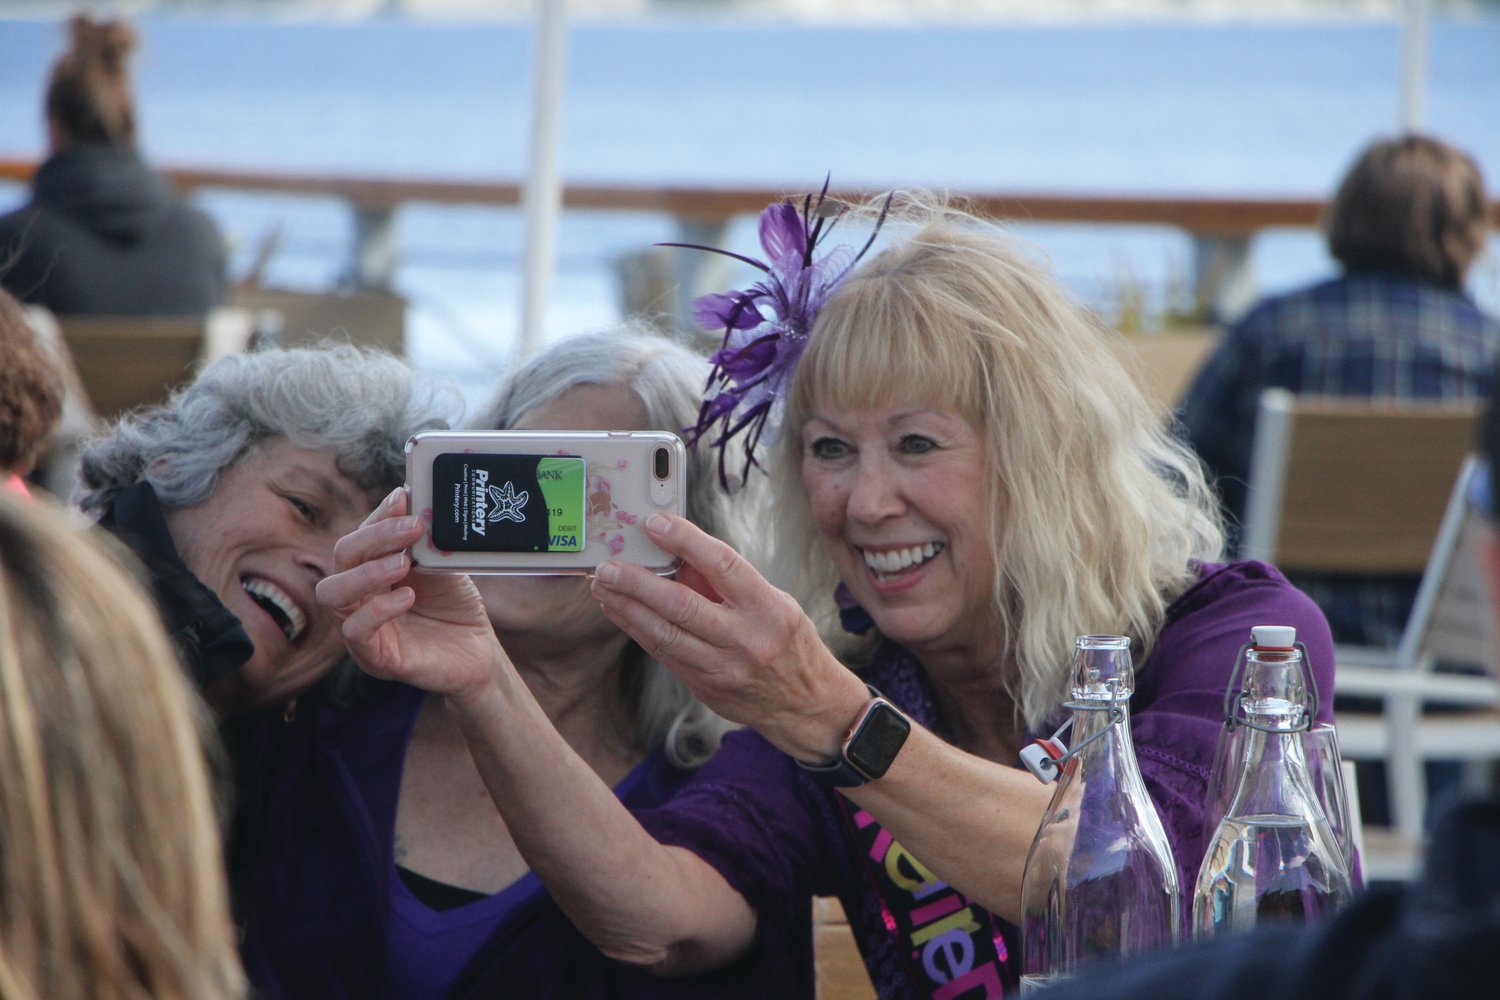 Jan Boutilier takes selfies with those who came to celebrate her retirement at Vintage by Port Townsend Vineyards.